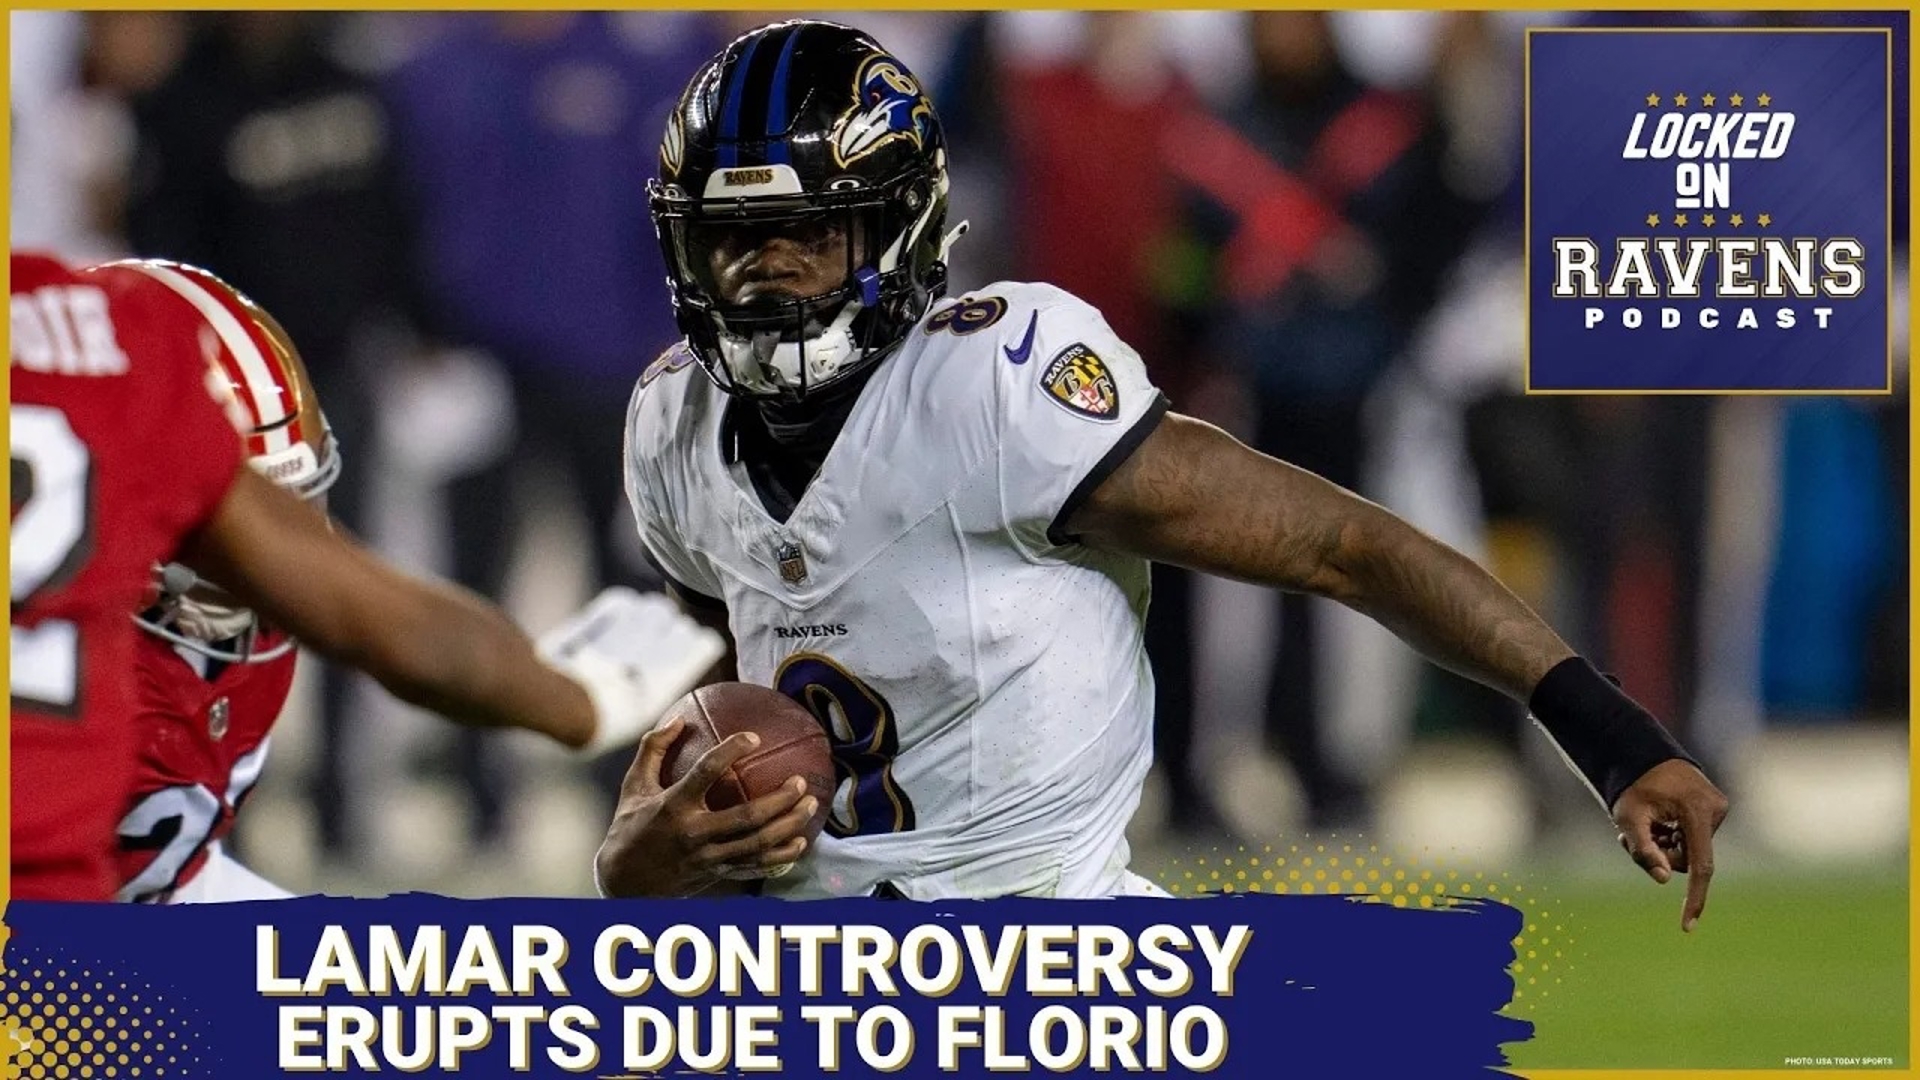 We look at how Baltimore Ravens quarterback Lamar Jackson saw the OTA attendance controversy surrounding him erupt due to Mike Florio.